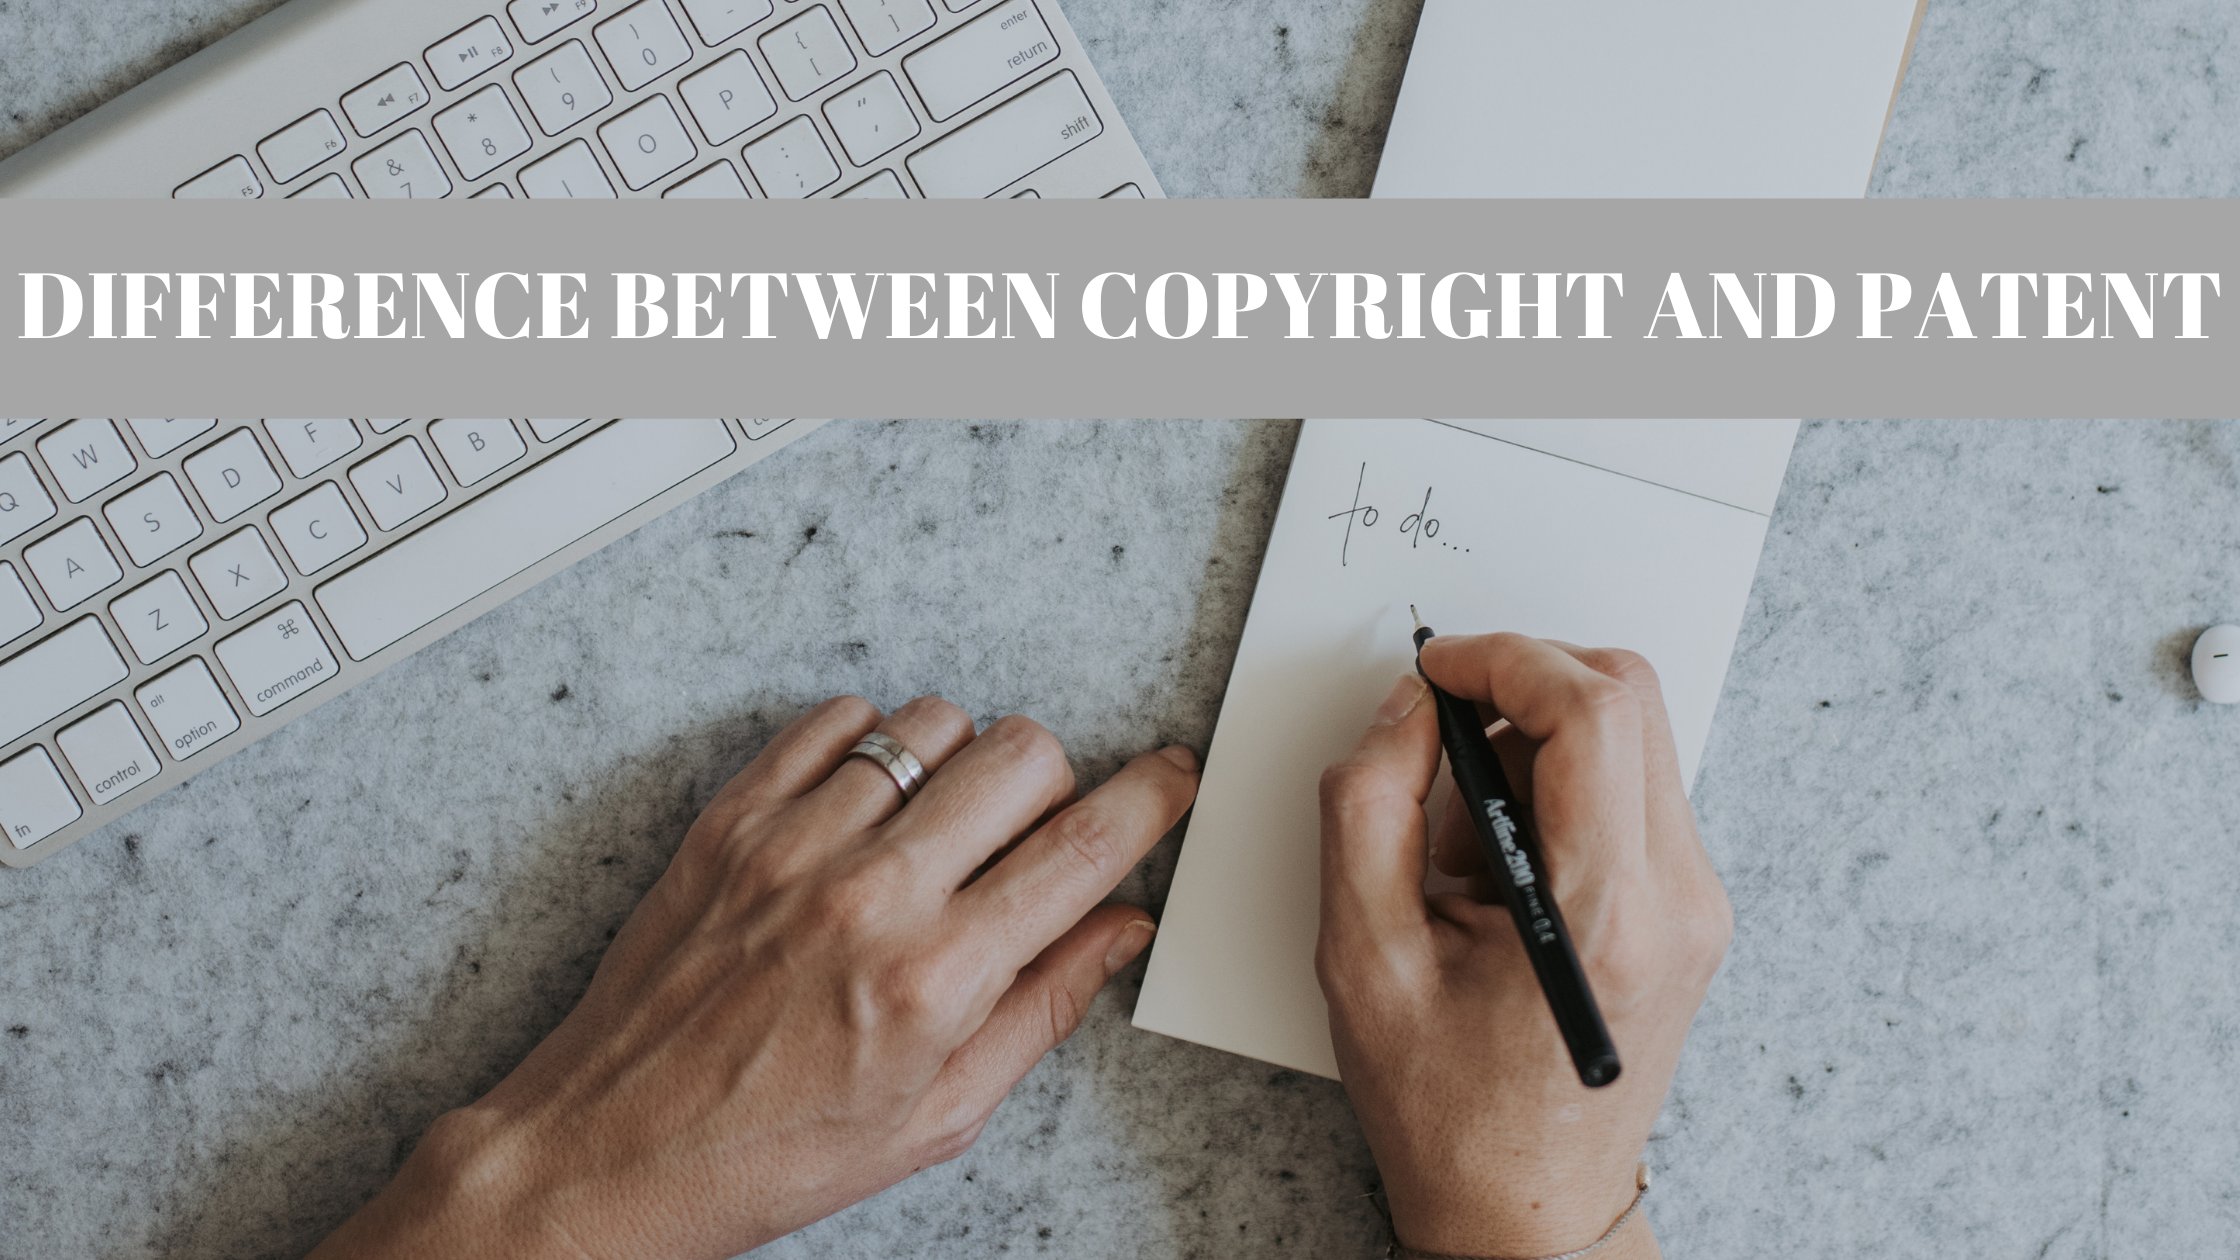 DIFFERENCE BETWEEN COPYRIGHT AND PATENT